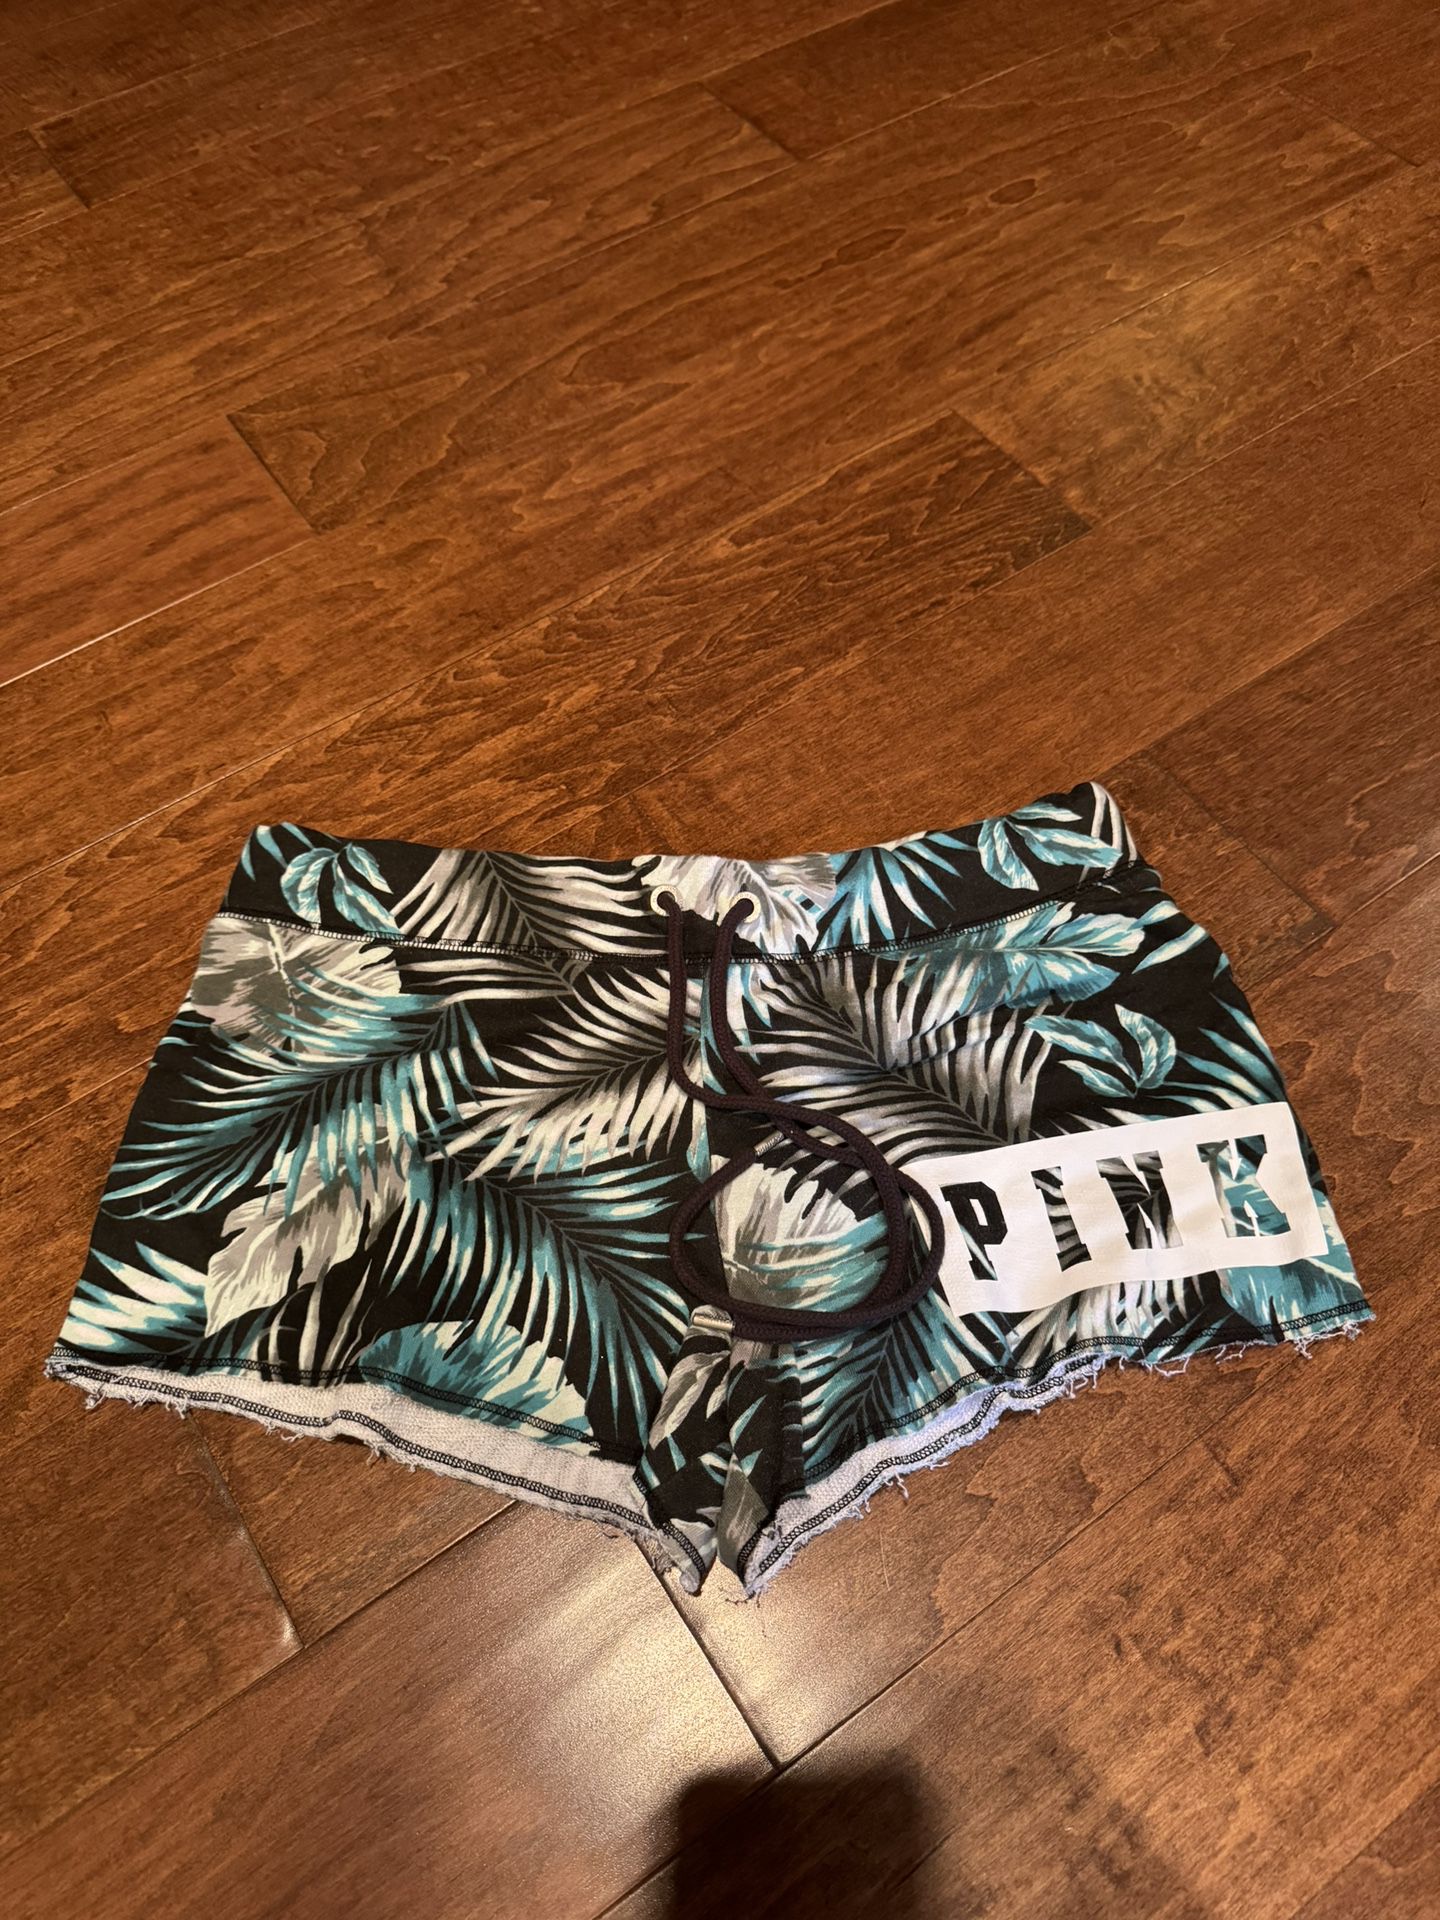 Woman’s Victoria’s Secret Pink Shorts, New Without Tags Shipping Available